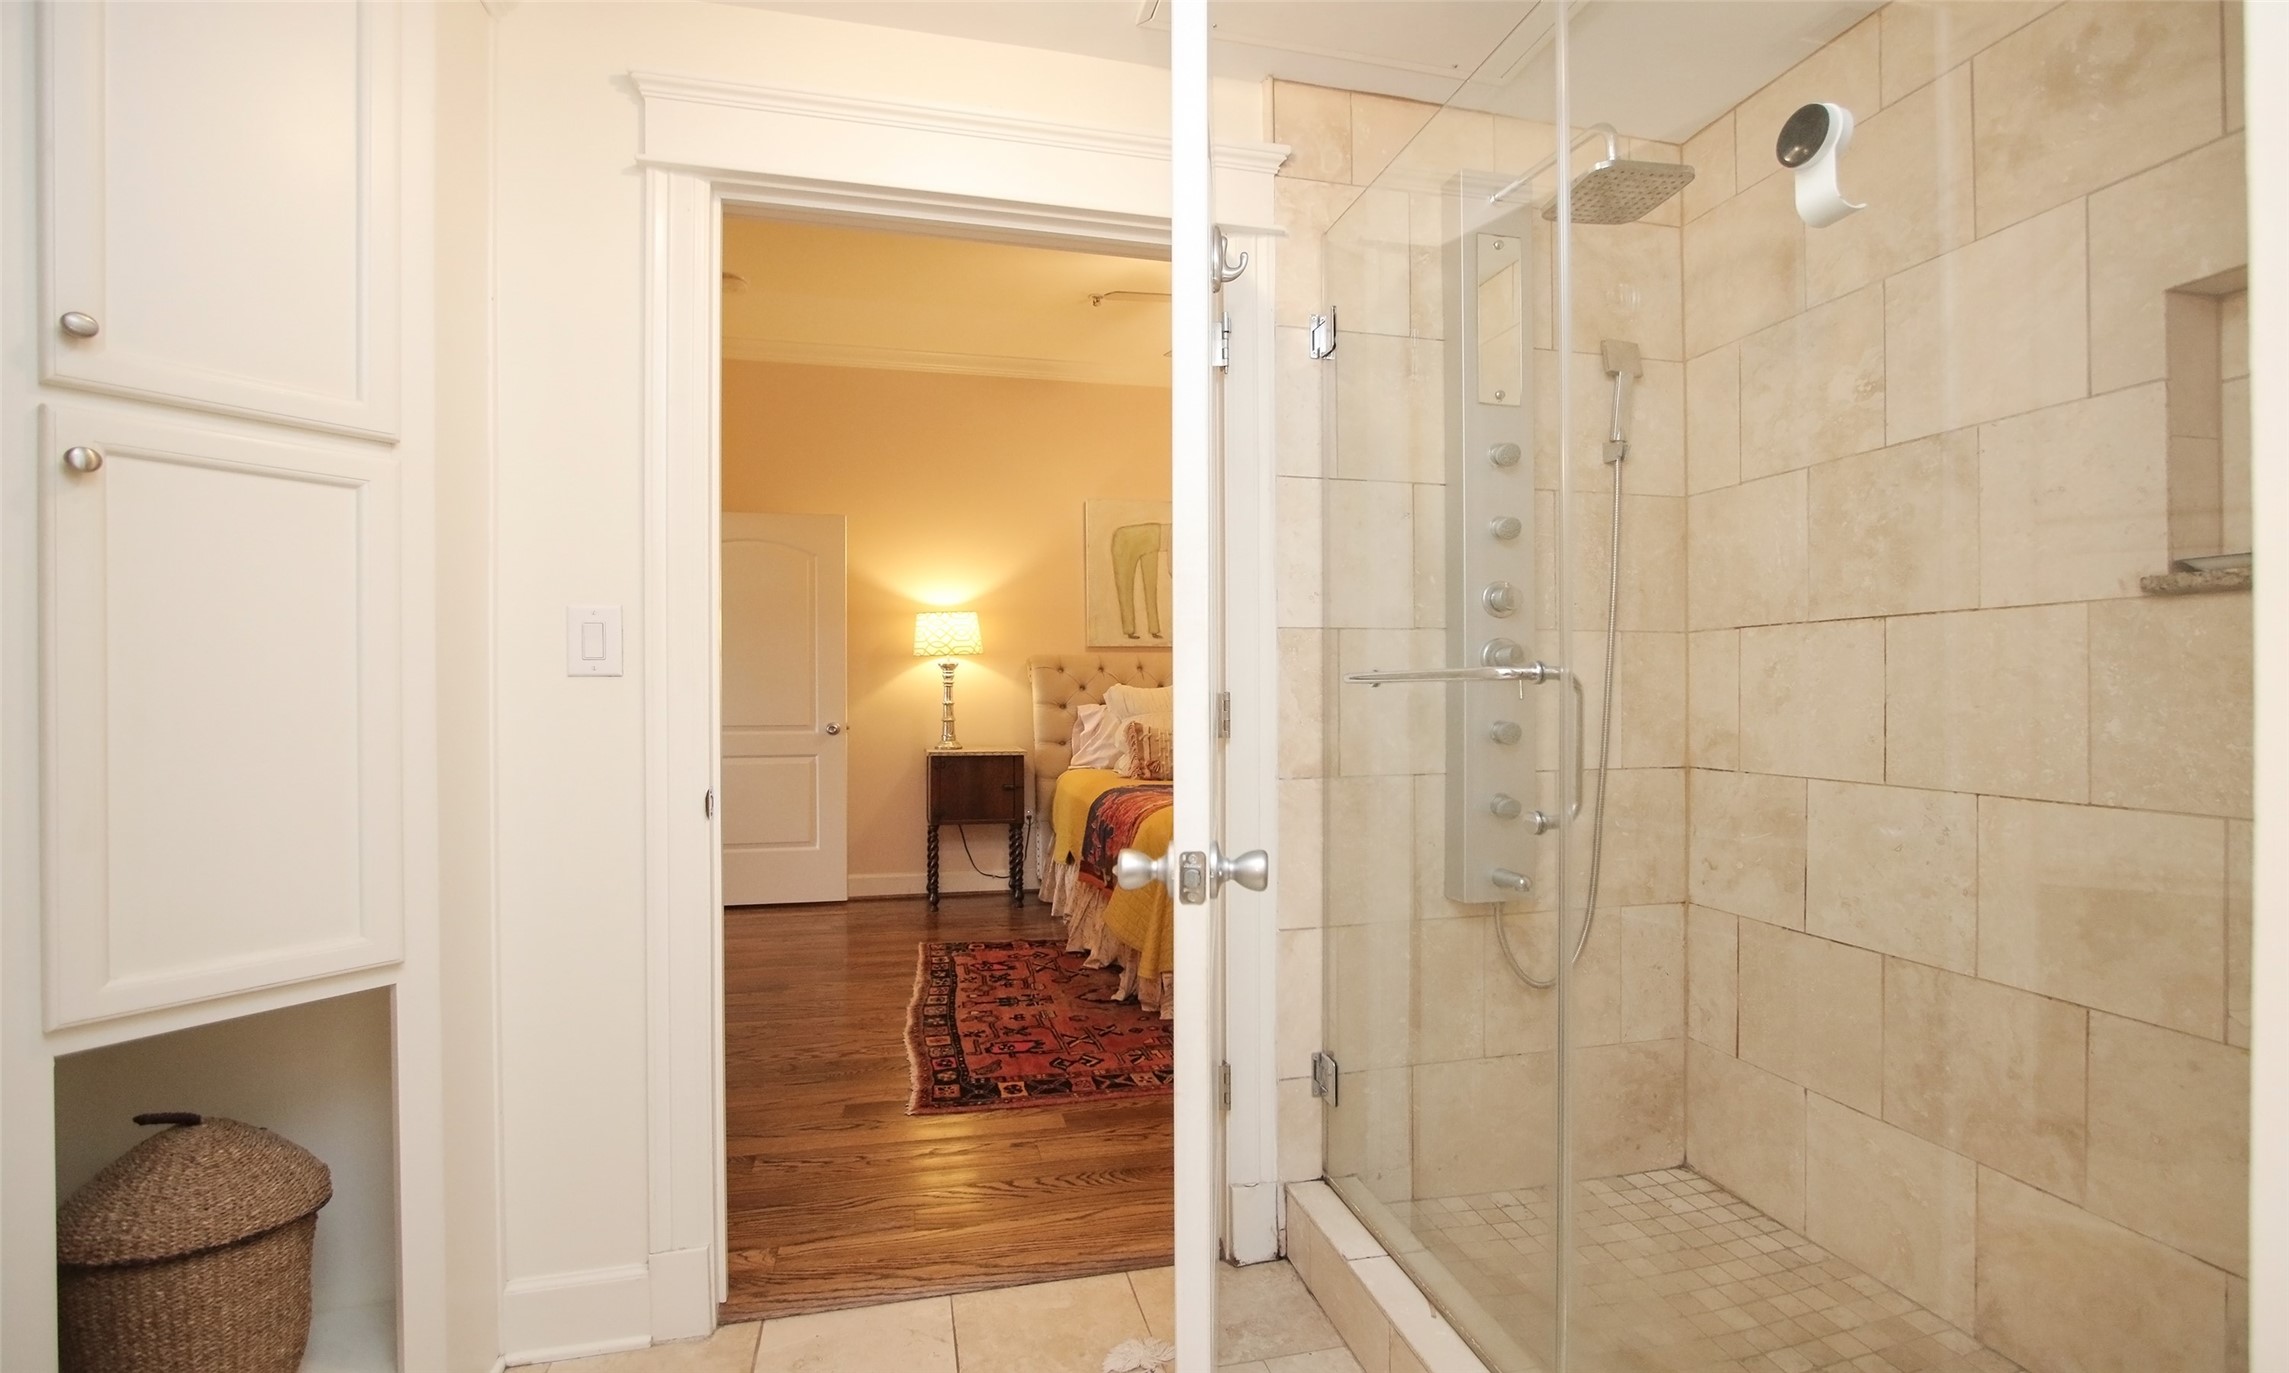 Enormous shower with rain head for a wonderful spa like shower.